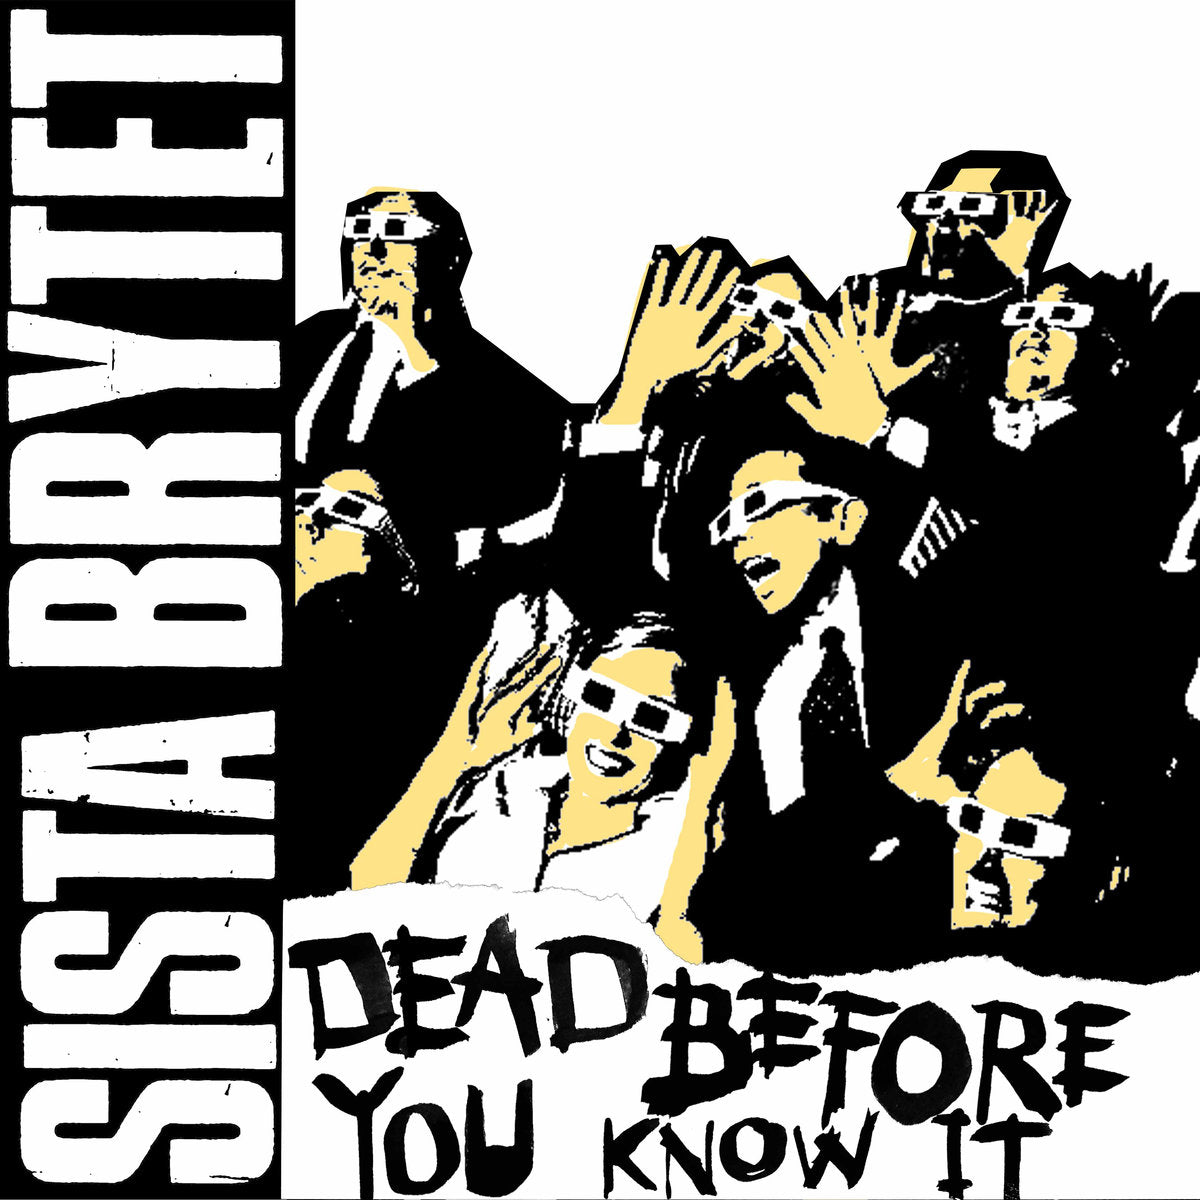 Sista Brytet- Dead Before You Know It 7” ~US BOMBS!